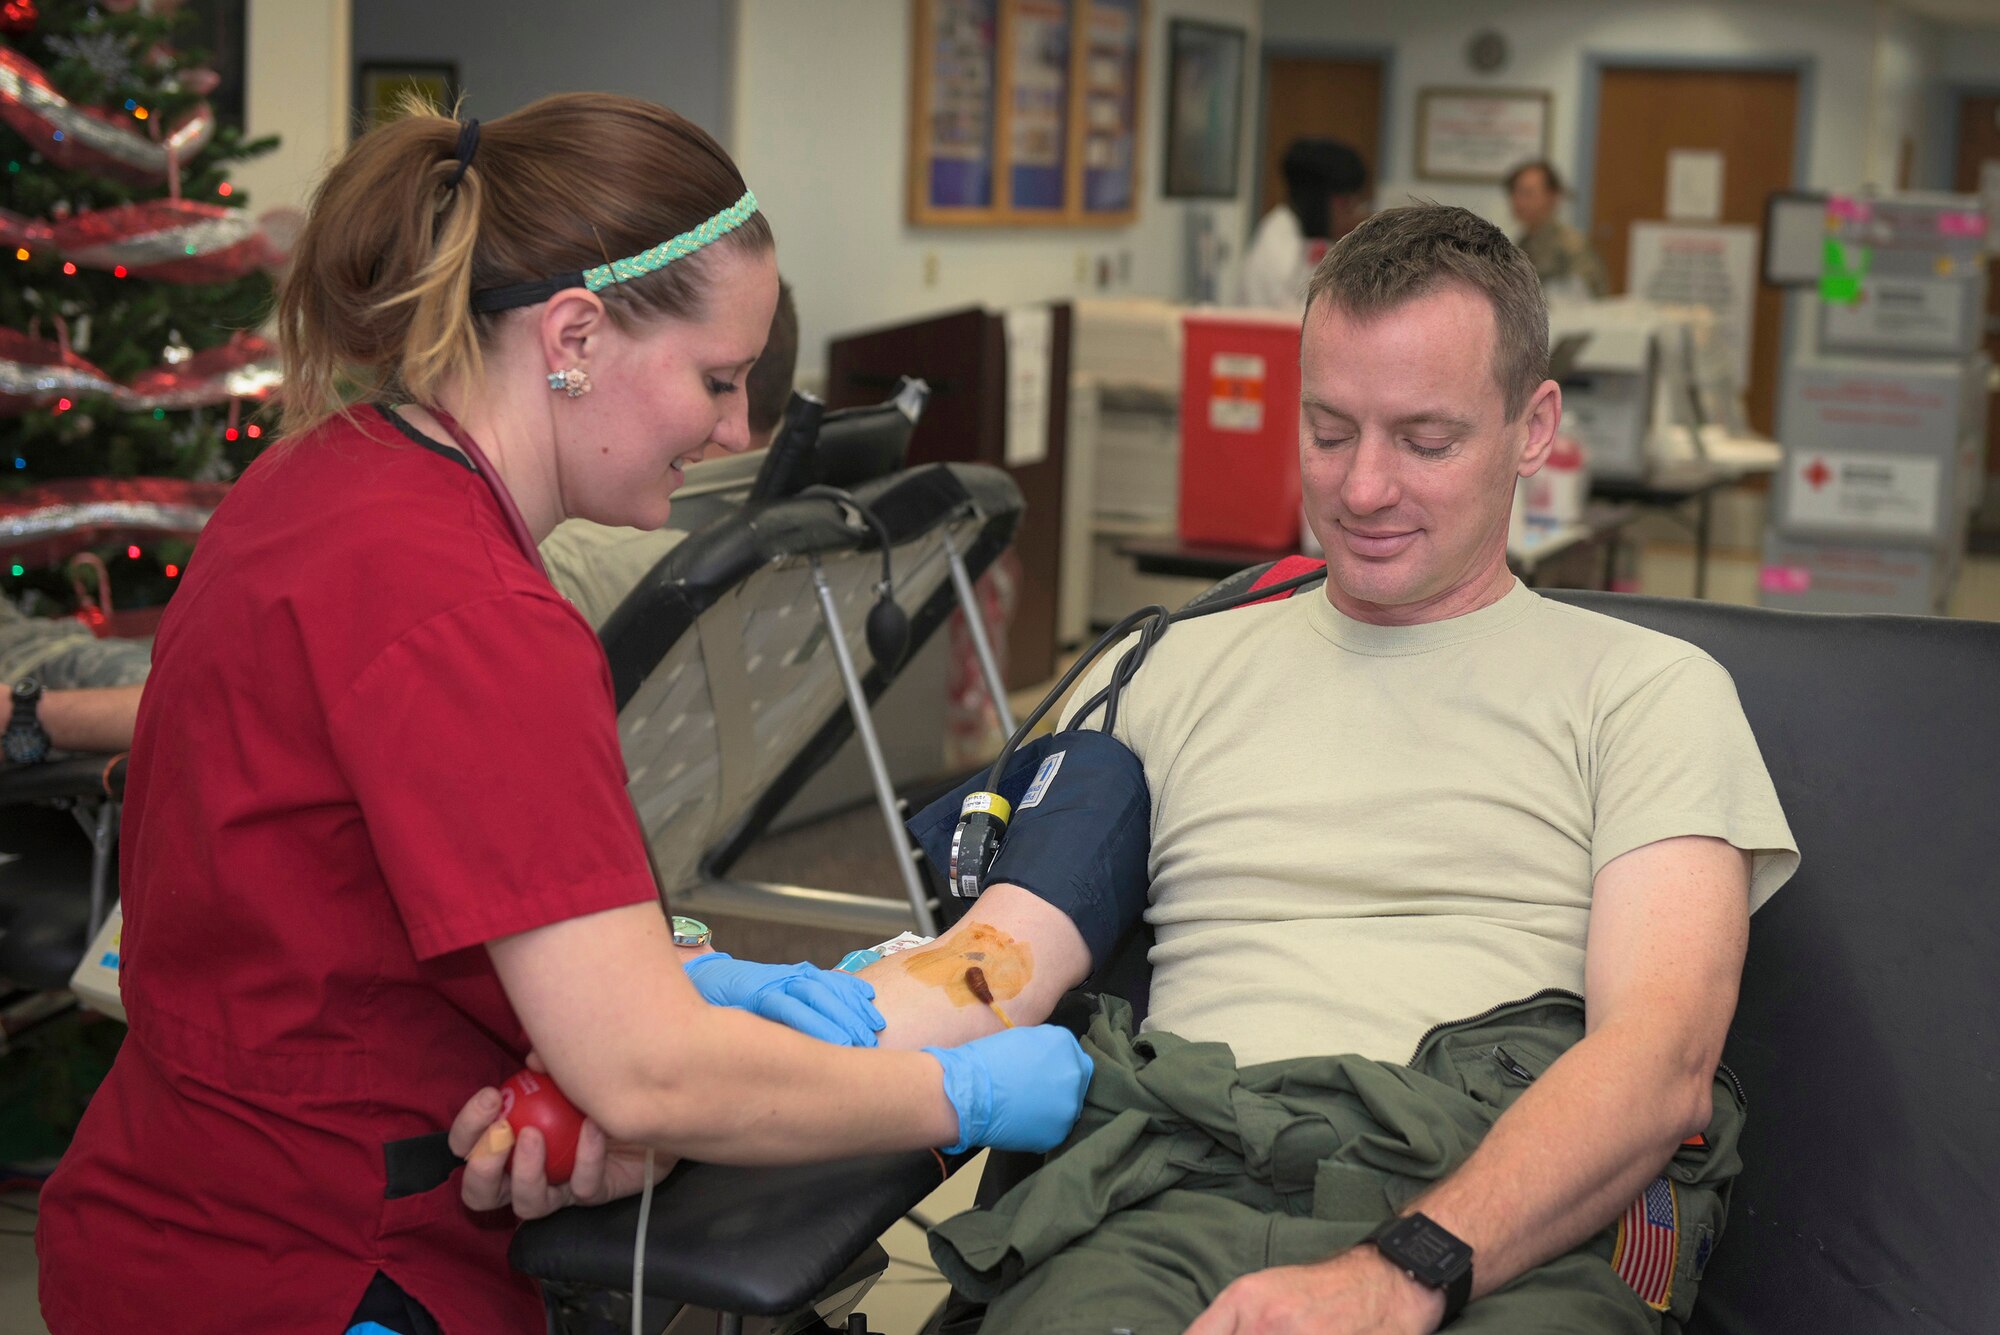 161214-Z-EU280-2020: U.S. Air Force Lt. Col. Eric Dolan, a C-130 Hercules navigator with the 182nd Operations Support Squadron, Illinois Air National Guard, gets sterilized with iodine before donating blood at an American Red Cross blood drive at the 182nd Airlift Wing in Peoria, Ill., Dec. 14, 2016. The wing’s company grade officers council hosted the event as a way for unit members to give back to their communities. (U.S. Air National Guard photo by Tech. Sgt. Lealan Buehrer)